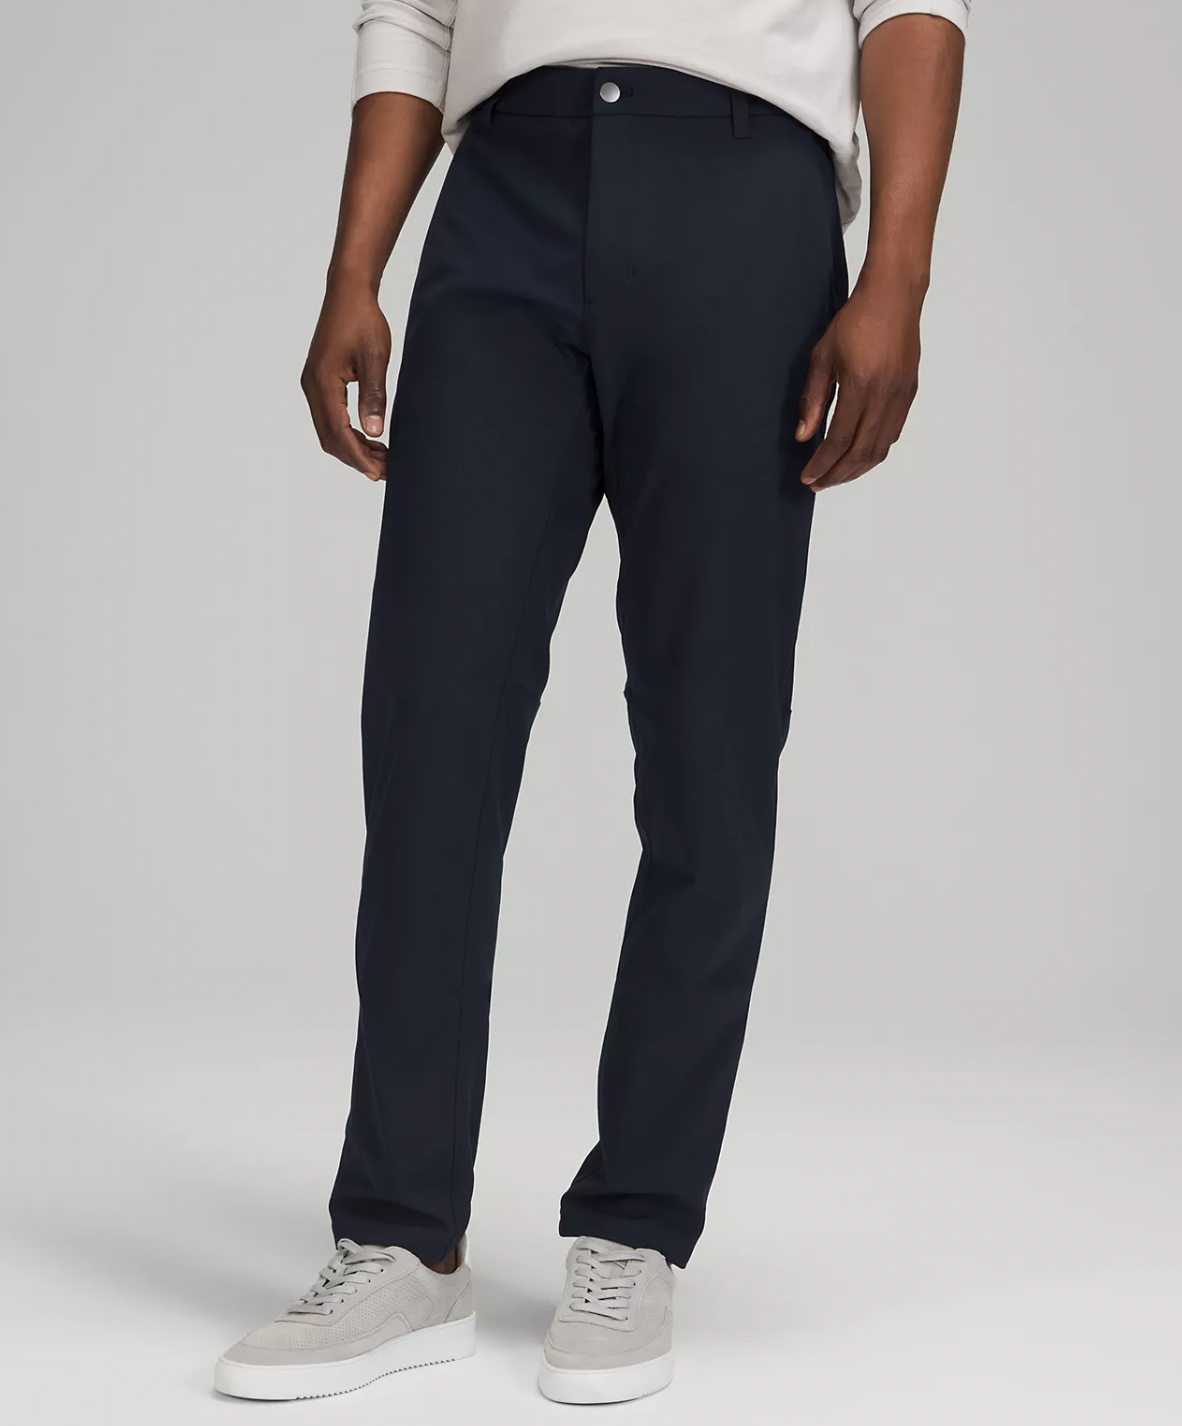 <p><strong>$128.00</strong></p><p><a href="https://go.redirectingat.com?id=74968X1553576&url=https%3A%2F%2Fshop.lululemon.com%2Fp%2Fmen-pants%2FCommission-Pant-Classic-Warpstreme-32%2F_%2Fprod9510026&sref=https%3A%2F%2Fwww.esquire.com%2Fstyle%2Fmens-fashion%2Fg40115125%2Fbest-mens-travel-pants%2F">Shop Now</a></p><p>Trust that Lululemon always pays careful attention to comfort, performance, and functionality. And its celebrated Commission pants—which are made of wrinkle-resistant, quick-drying, shape-retaining, breathable fabric—are a shining example of this sentiment. </p>